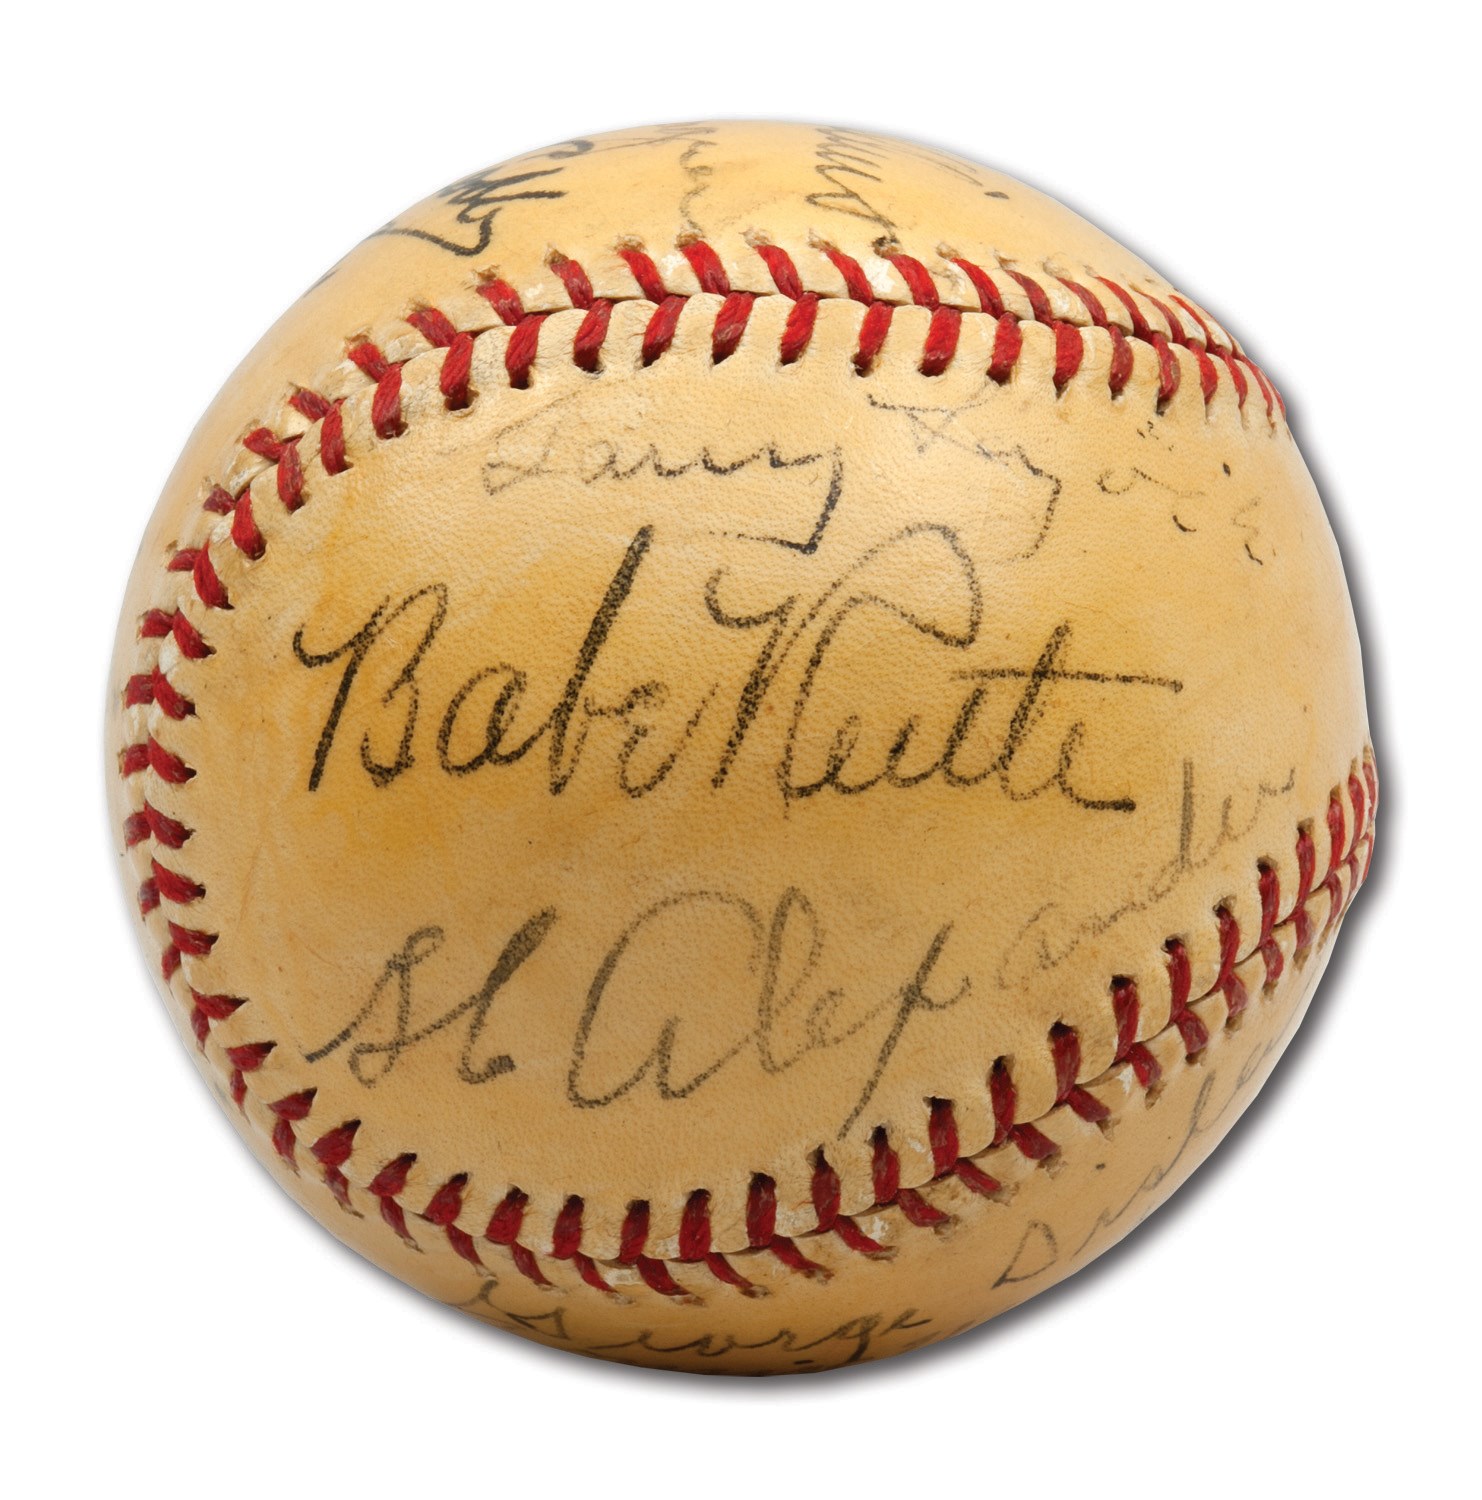 Lot Detail - 1939 BASEBALL HALL OF FAME INAUGURAL INDUCTEES AUTOGRAPHED  BASEBALL SIGNED EXCLUSIVELY BY THE ORIGINAL ELEVEN